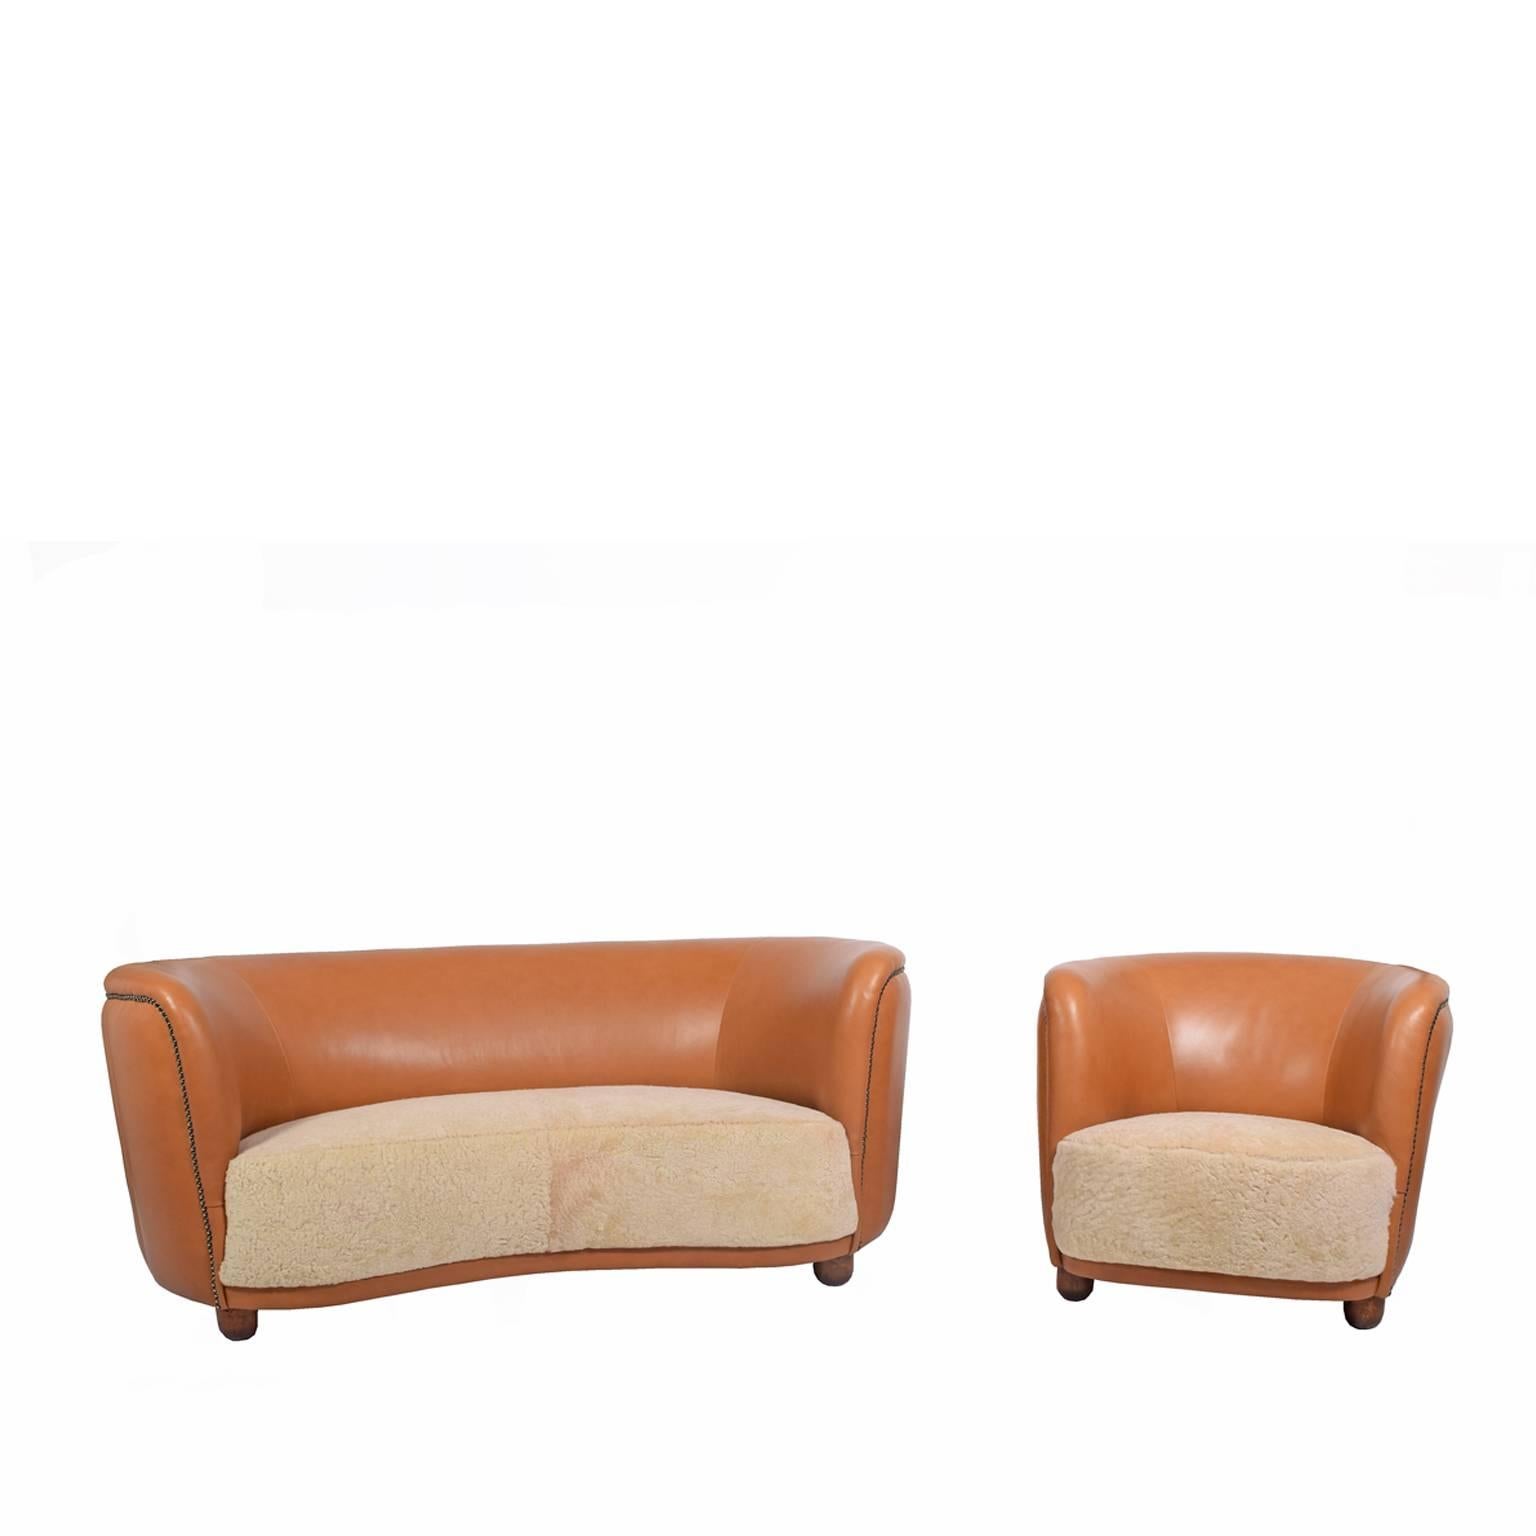 1940s Sofa and Chair by Flemming Lassen Attributed